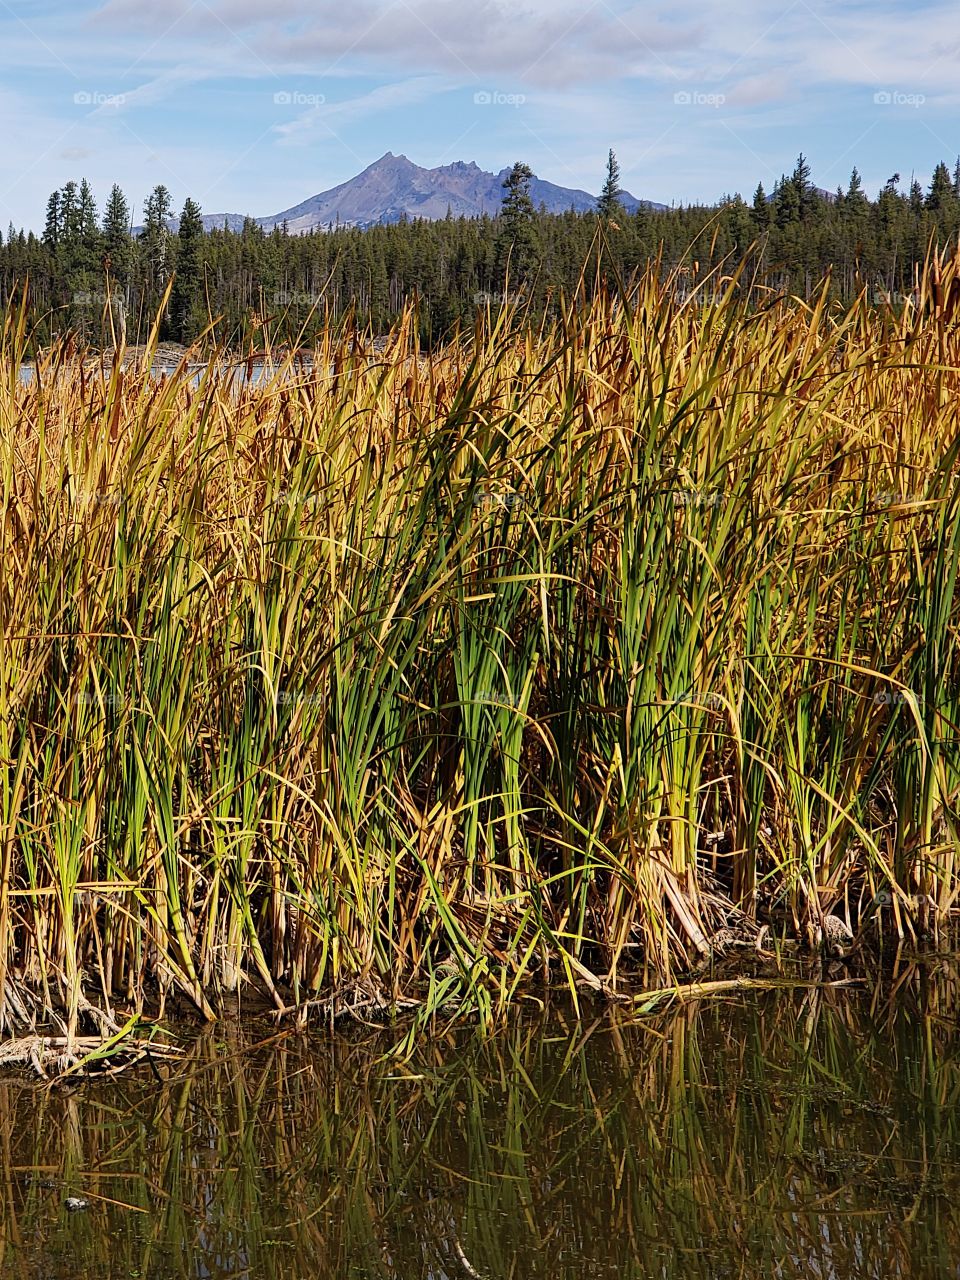 The South Sister in Oregon’s Cascade Mountain Range against a bright blue sky overlooks Lava Lake and the reeds along its shores in their fall colors of yellow and orange in the Deschutes National Forest on a sunny autumn day. 